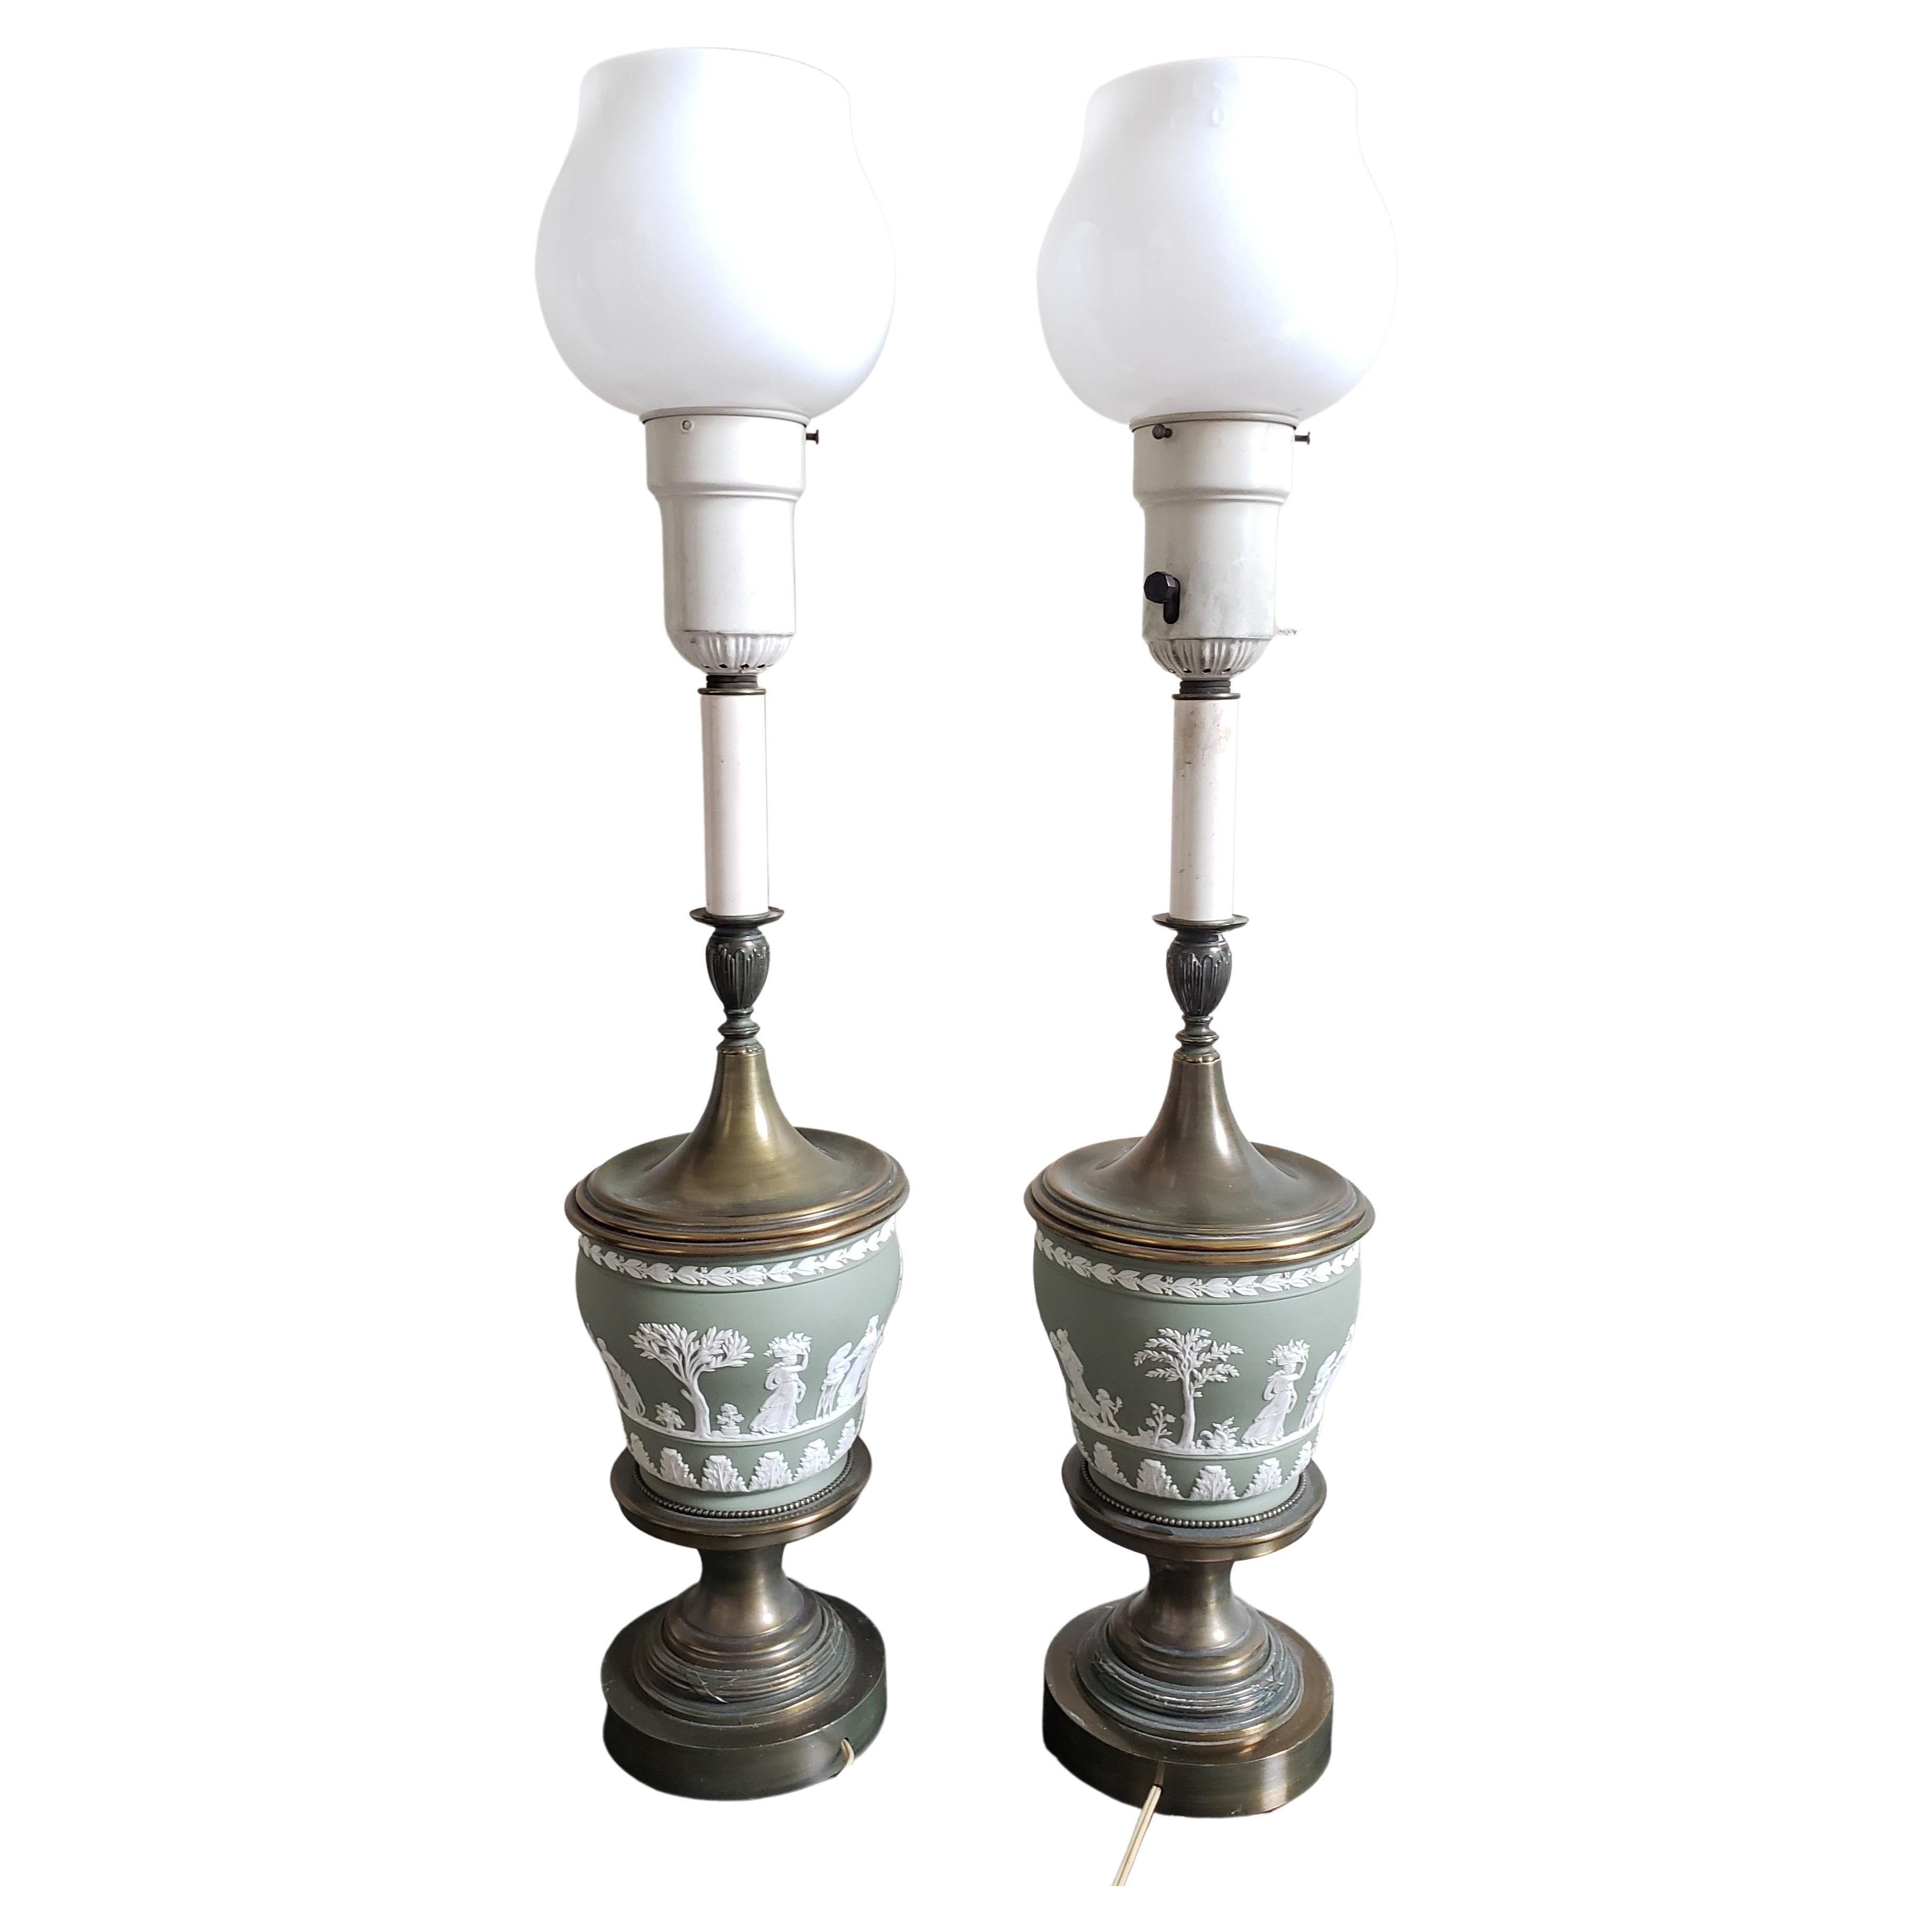 Metalwork Green Turquoise Wedgewood Jasperware and Brass Torchiere Table Lamps, a Pair For Sale